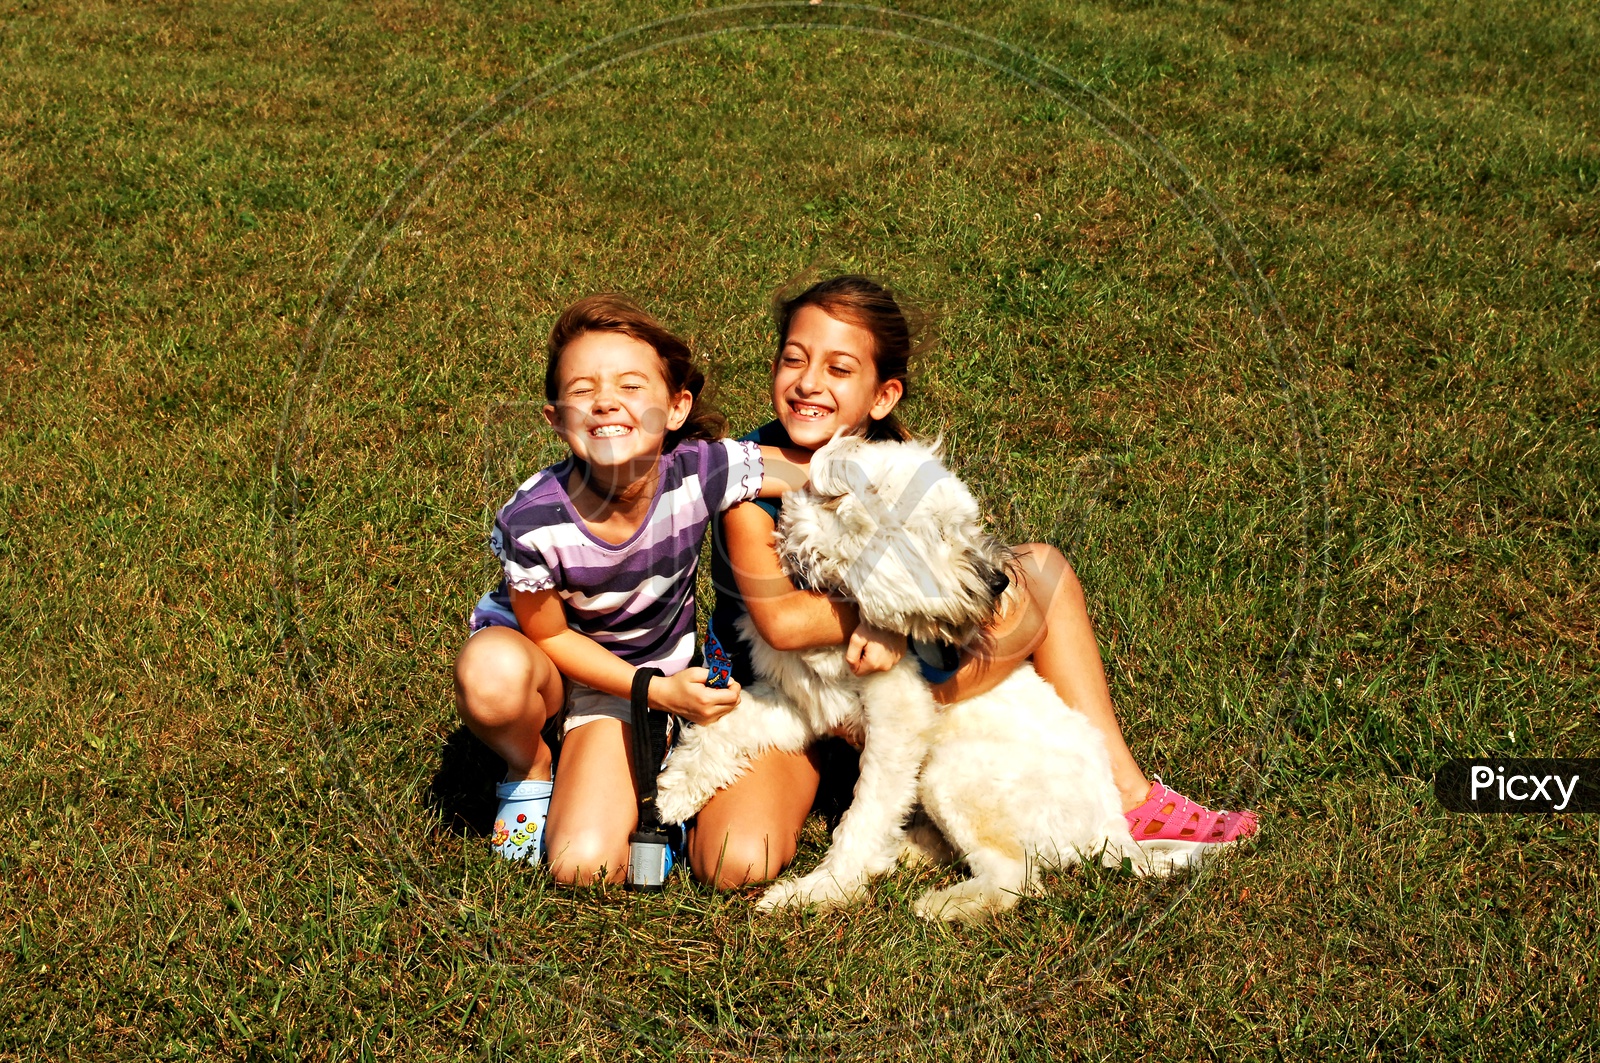 Two little girls playing with their pet